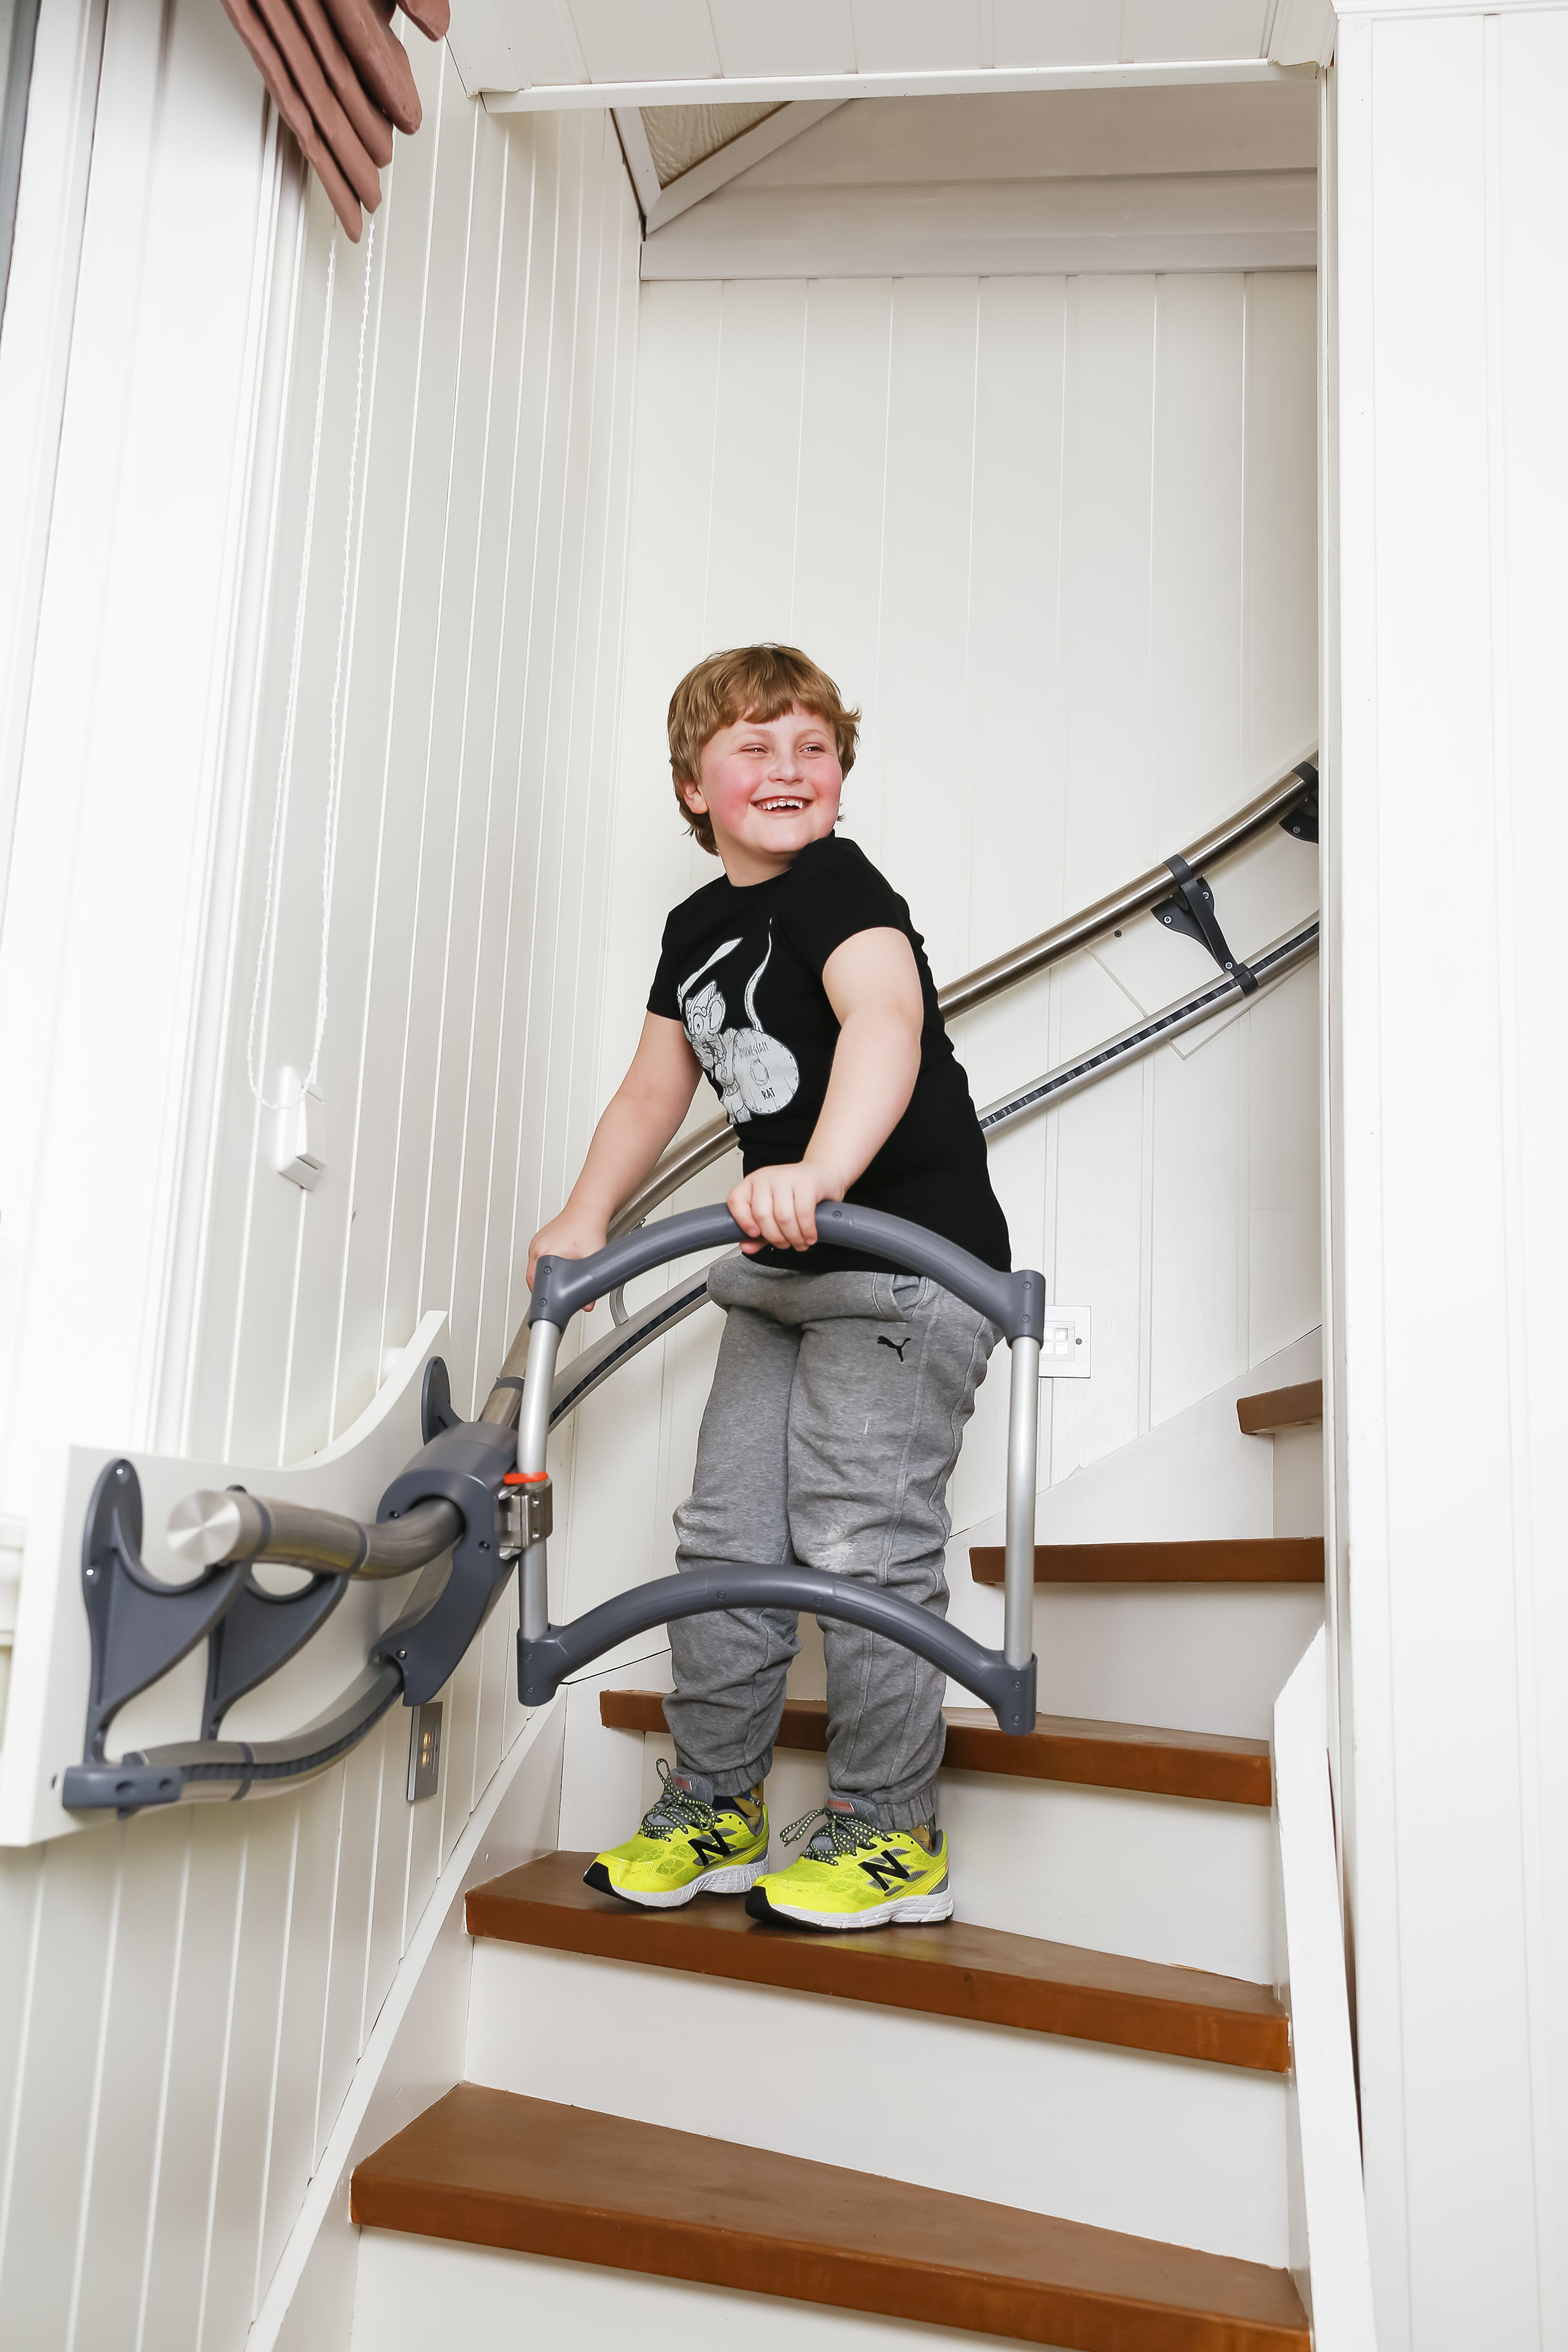 Stair aid boy with CP